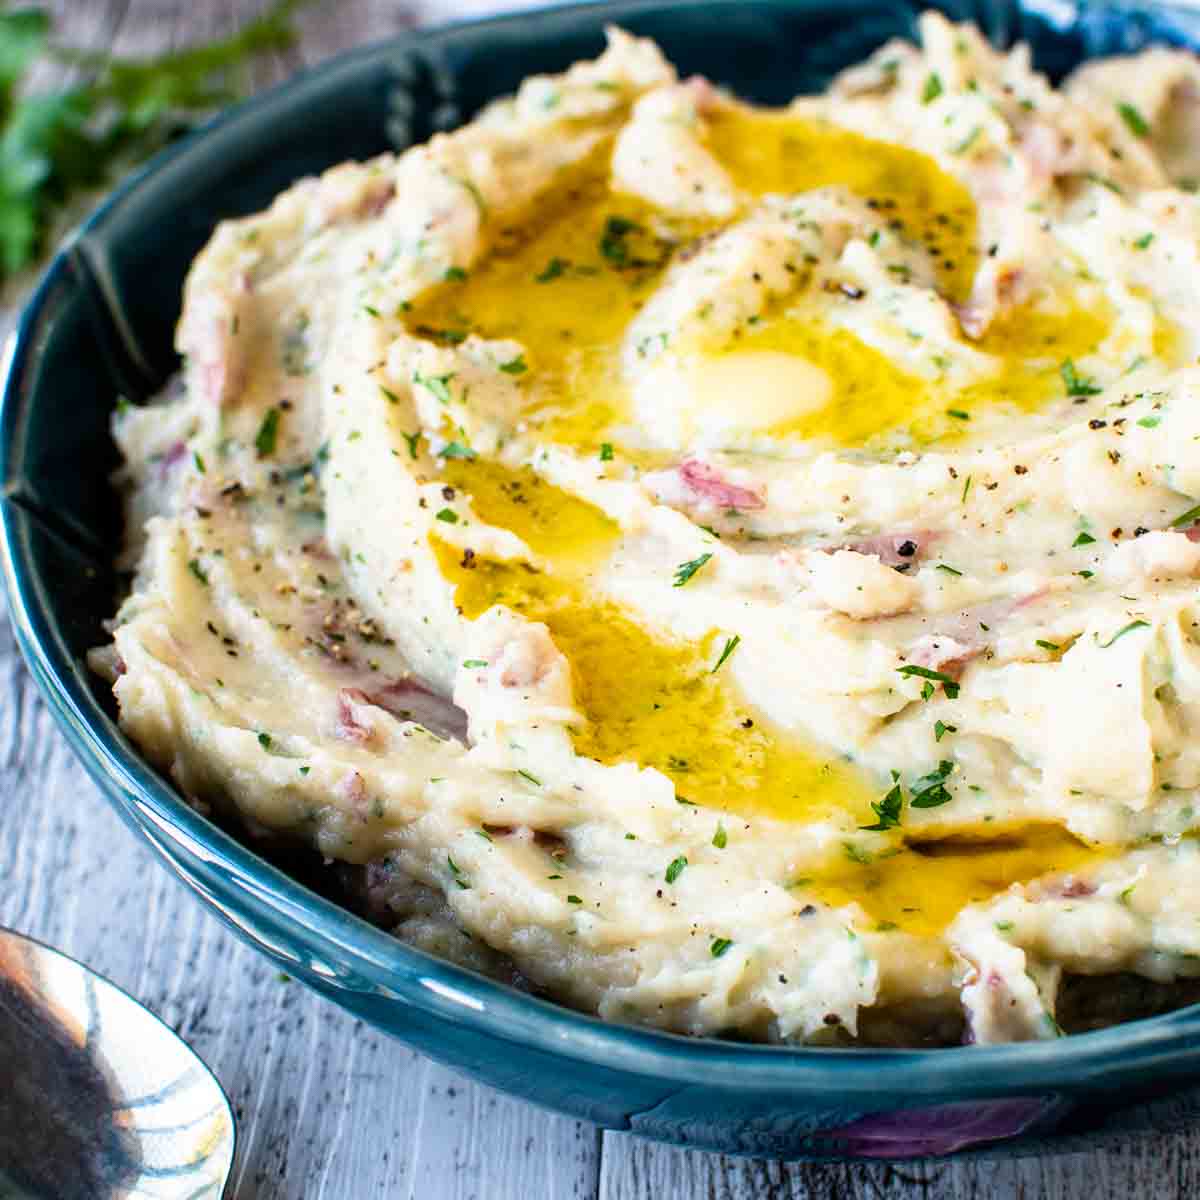 Mashed Potatoes with Red Skin